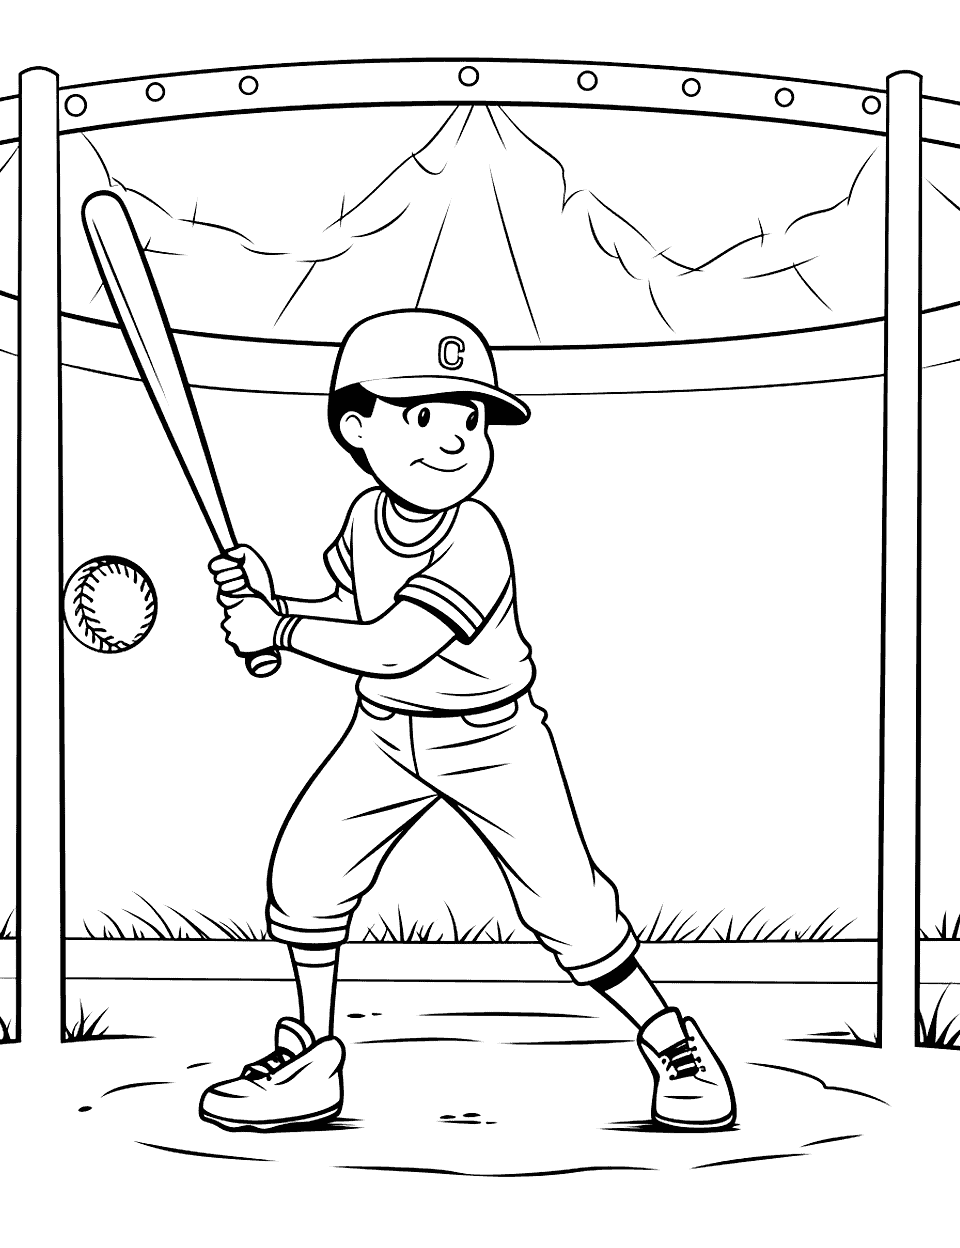 Batting Cage Practice Baseball Coloring Page - A player practicing swings in a batting cage.